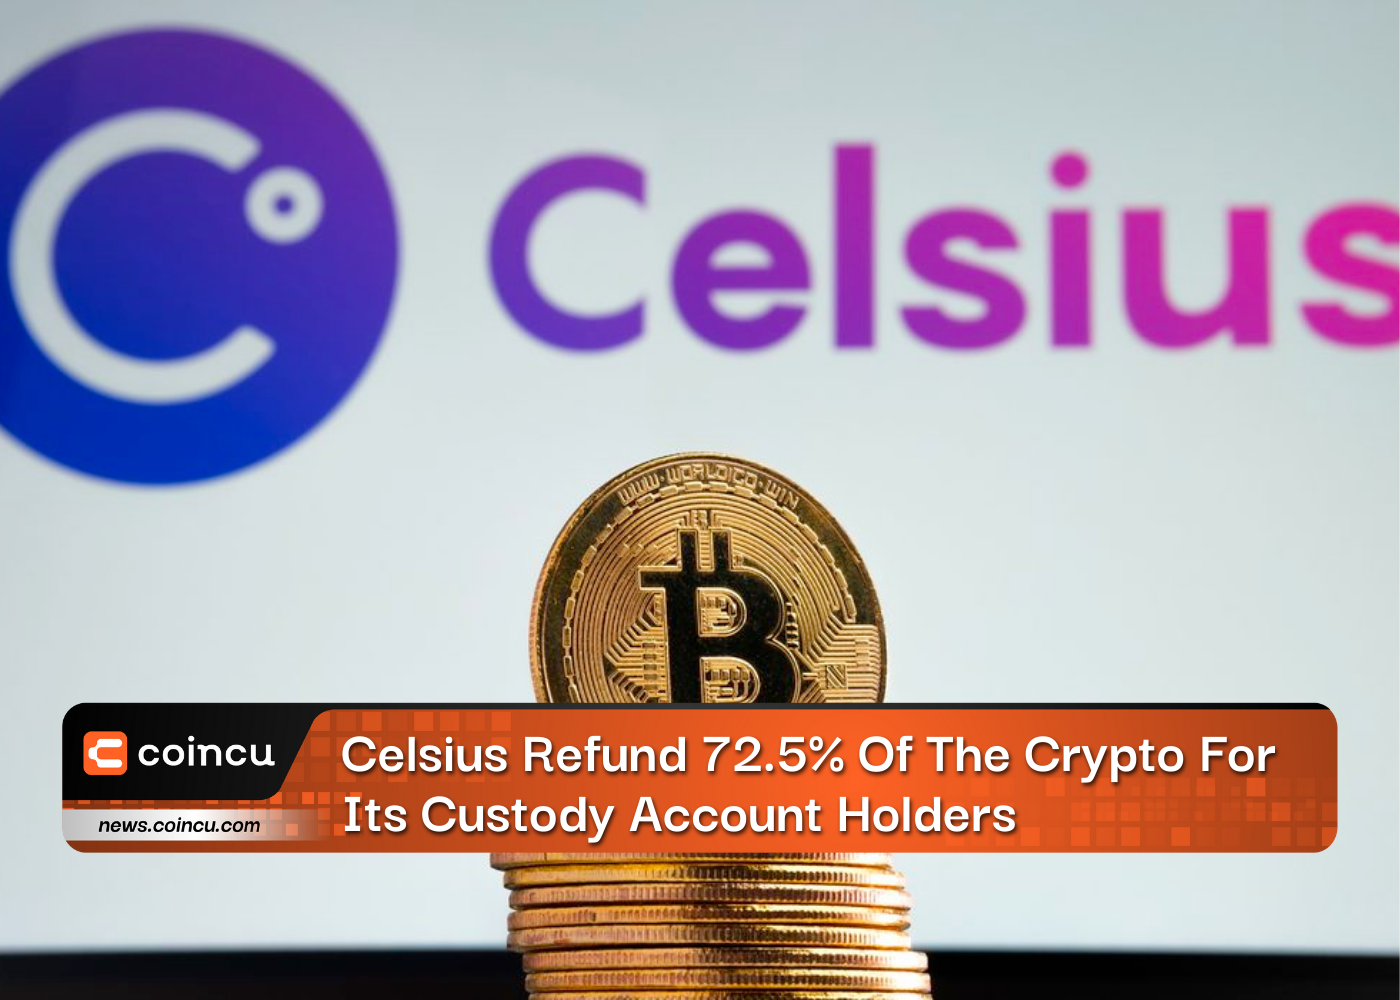 Celsius Refund 72.5% Of The Crypto For Its Custody Account Holders